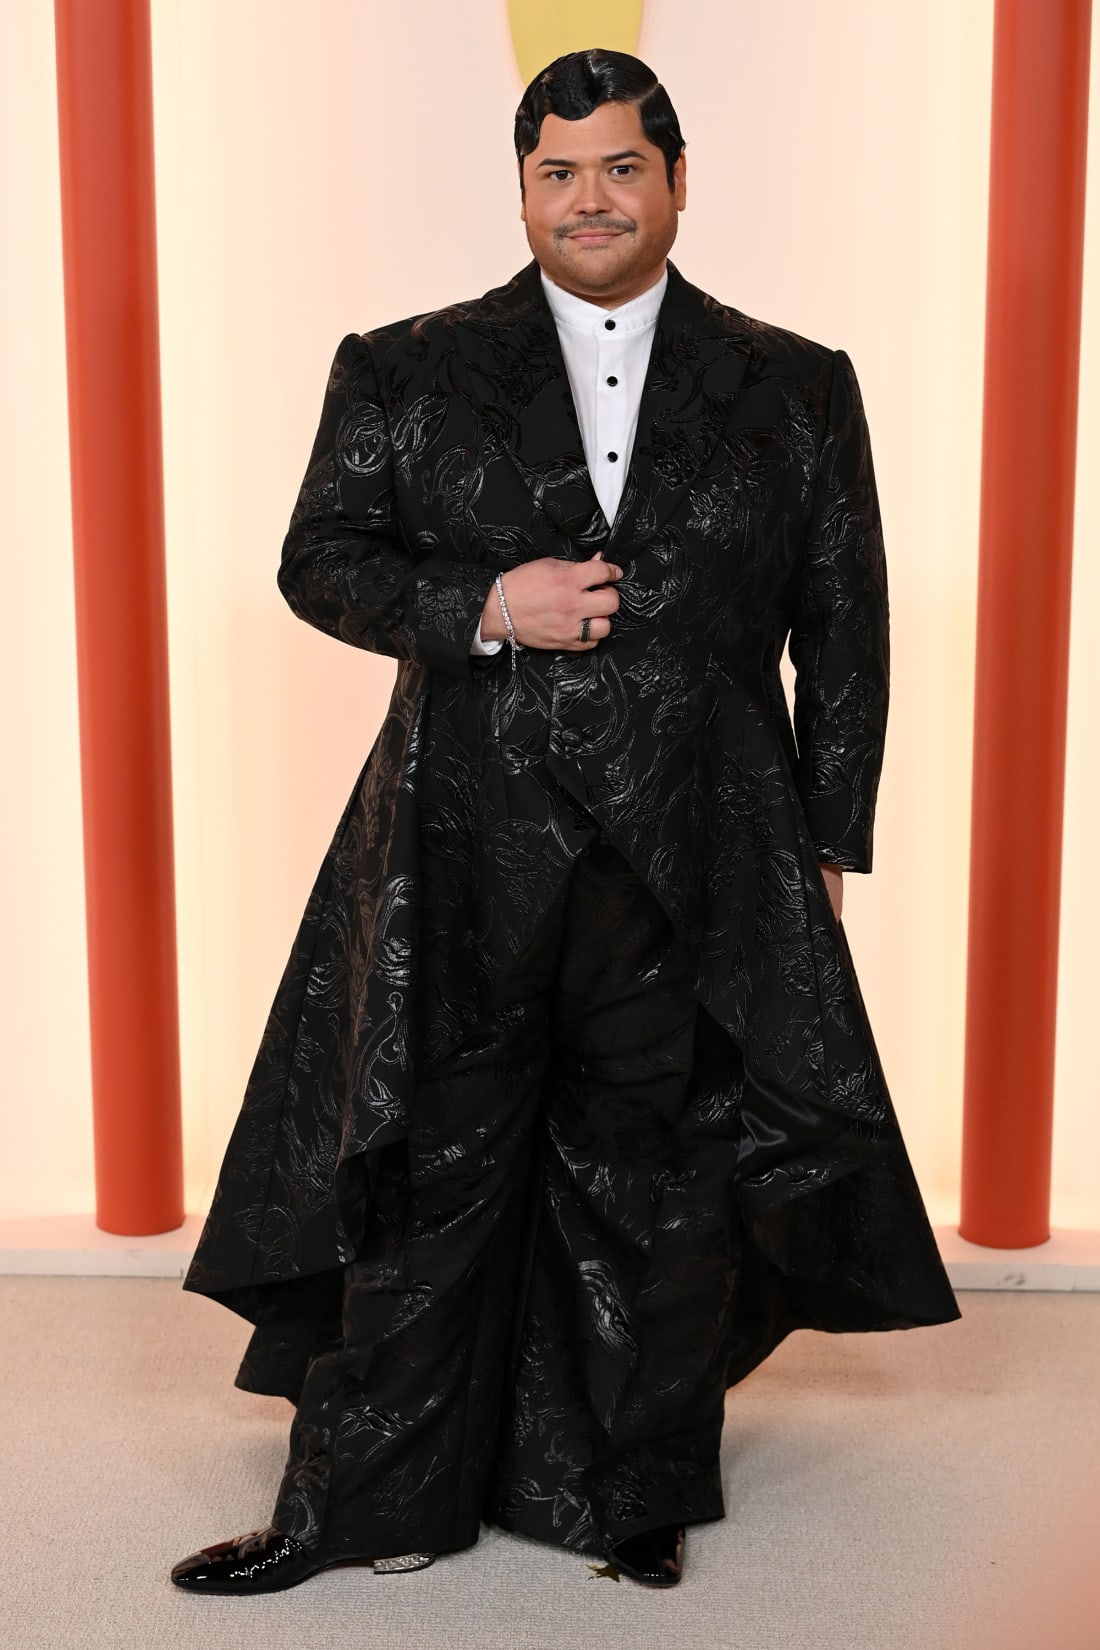 Harvey Guillen, who noted he was the first plus-sized male actor to be dressed by designer, put a twist on the traditional suit with a flared, embellished jacket by Christian Siriano.